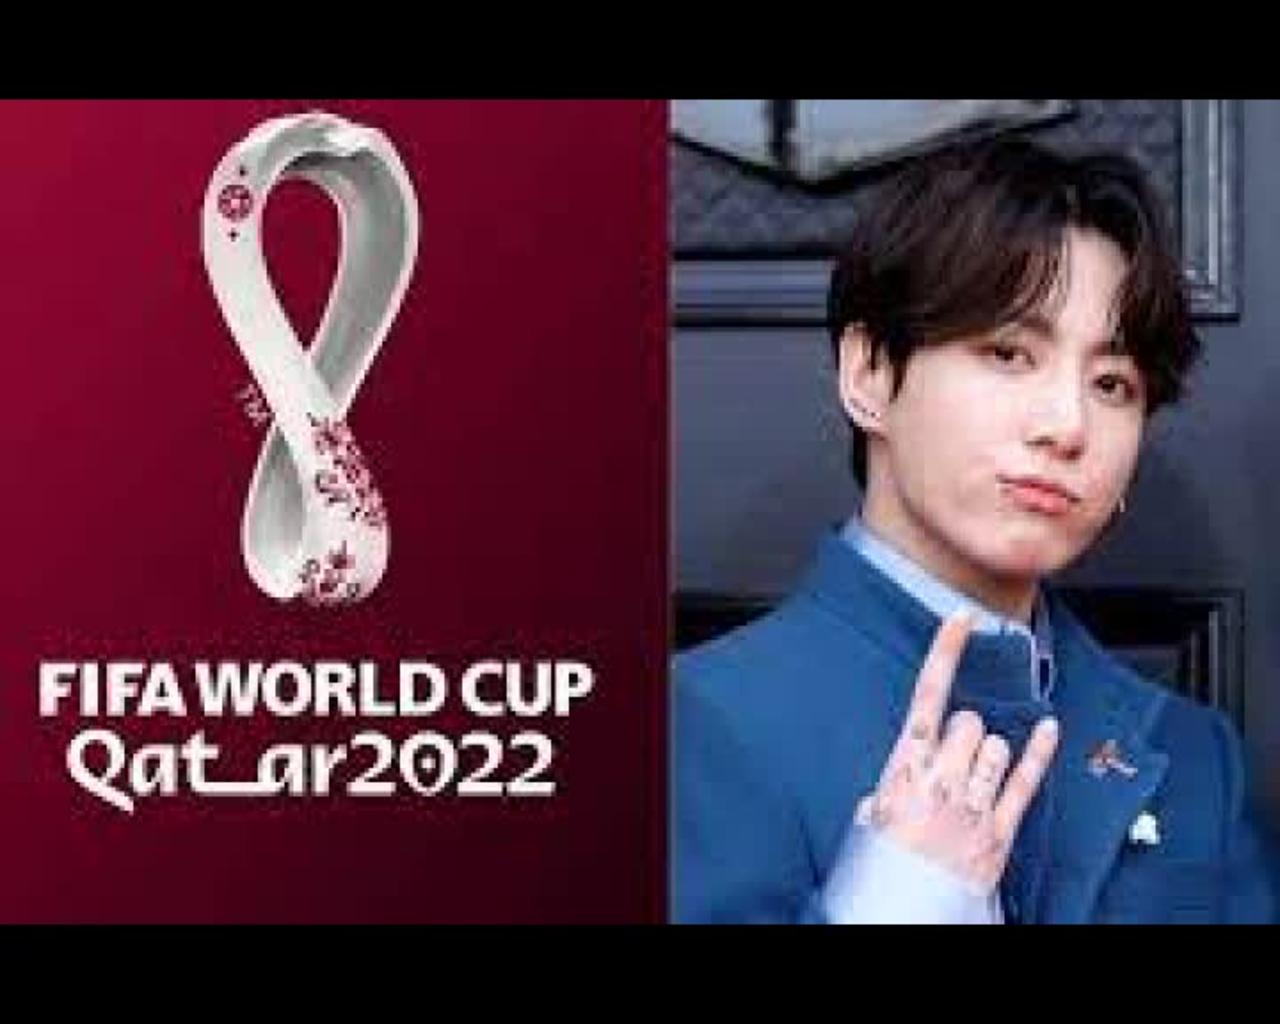 Jung Kook from BTS Performs "Dreamers" at FIFA World Cup 22 Opening Ceremony